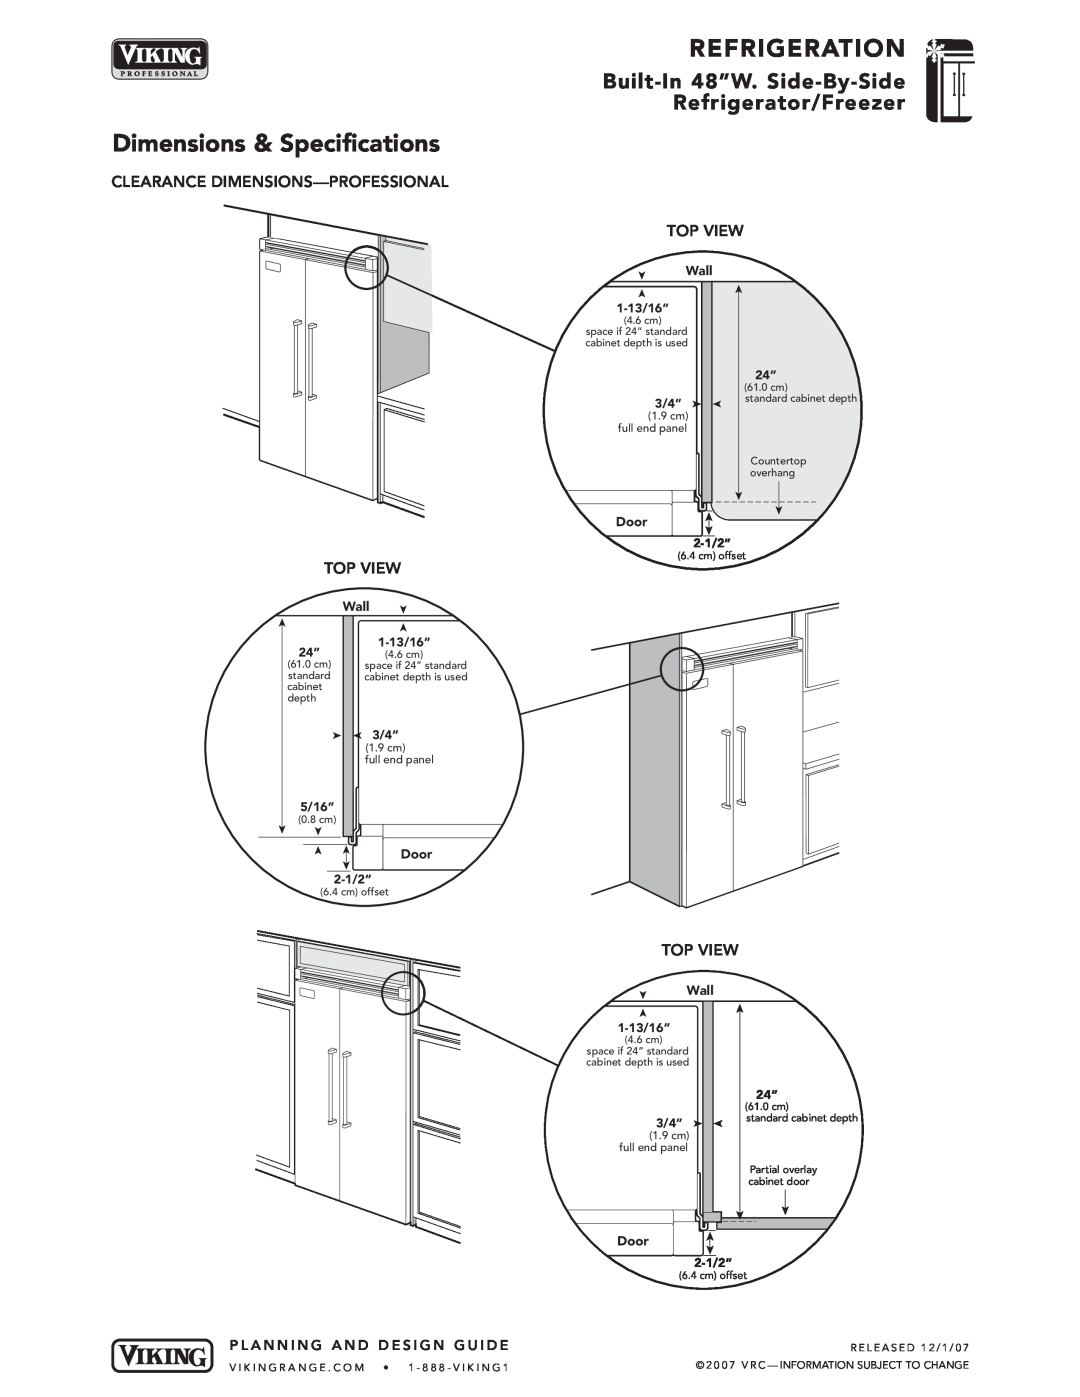 Viking DFSB483 Clearance Dimensions-Professional, Top View, Dimensions & Specifications, Refrigeration, Wall, 1-13/16” 